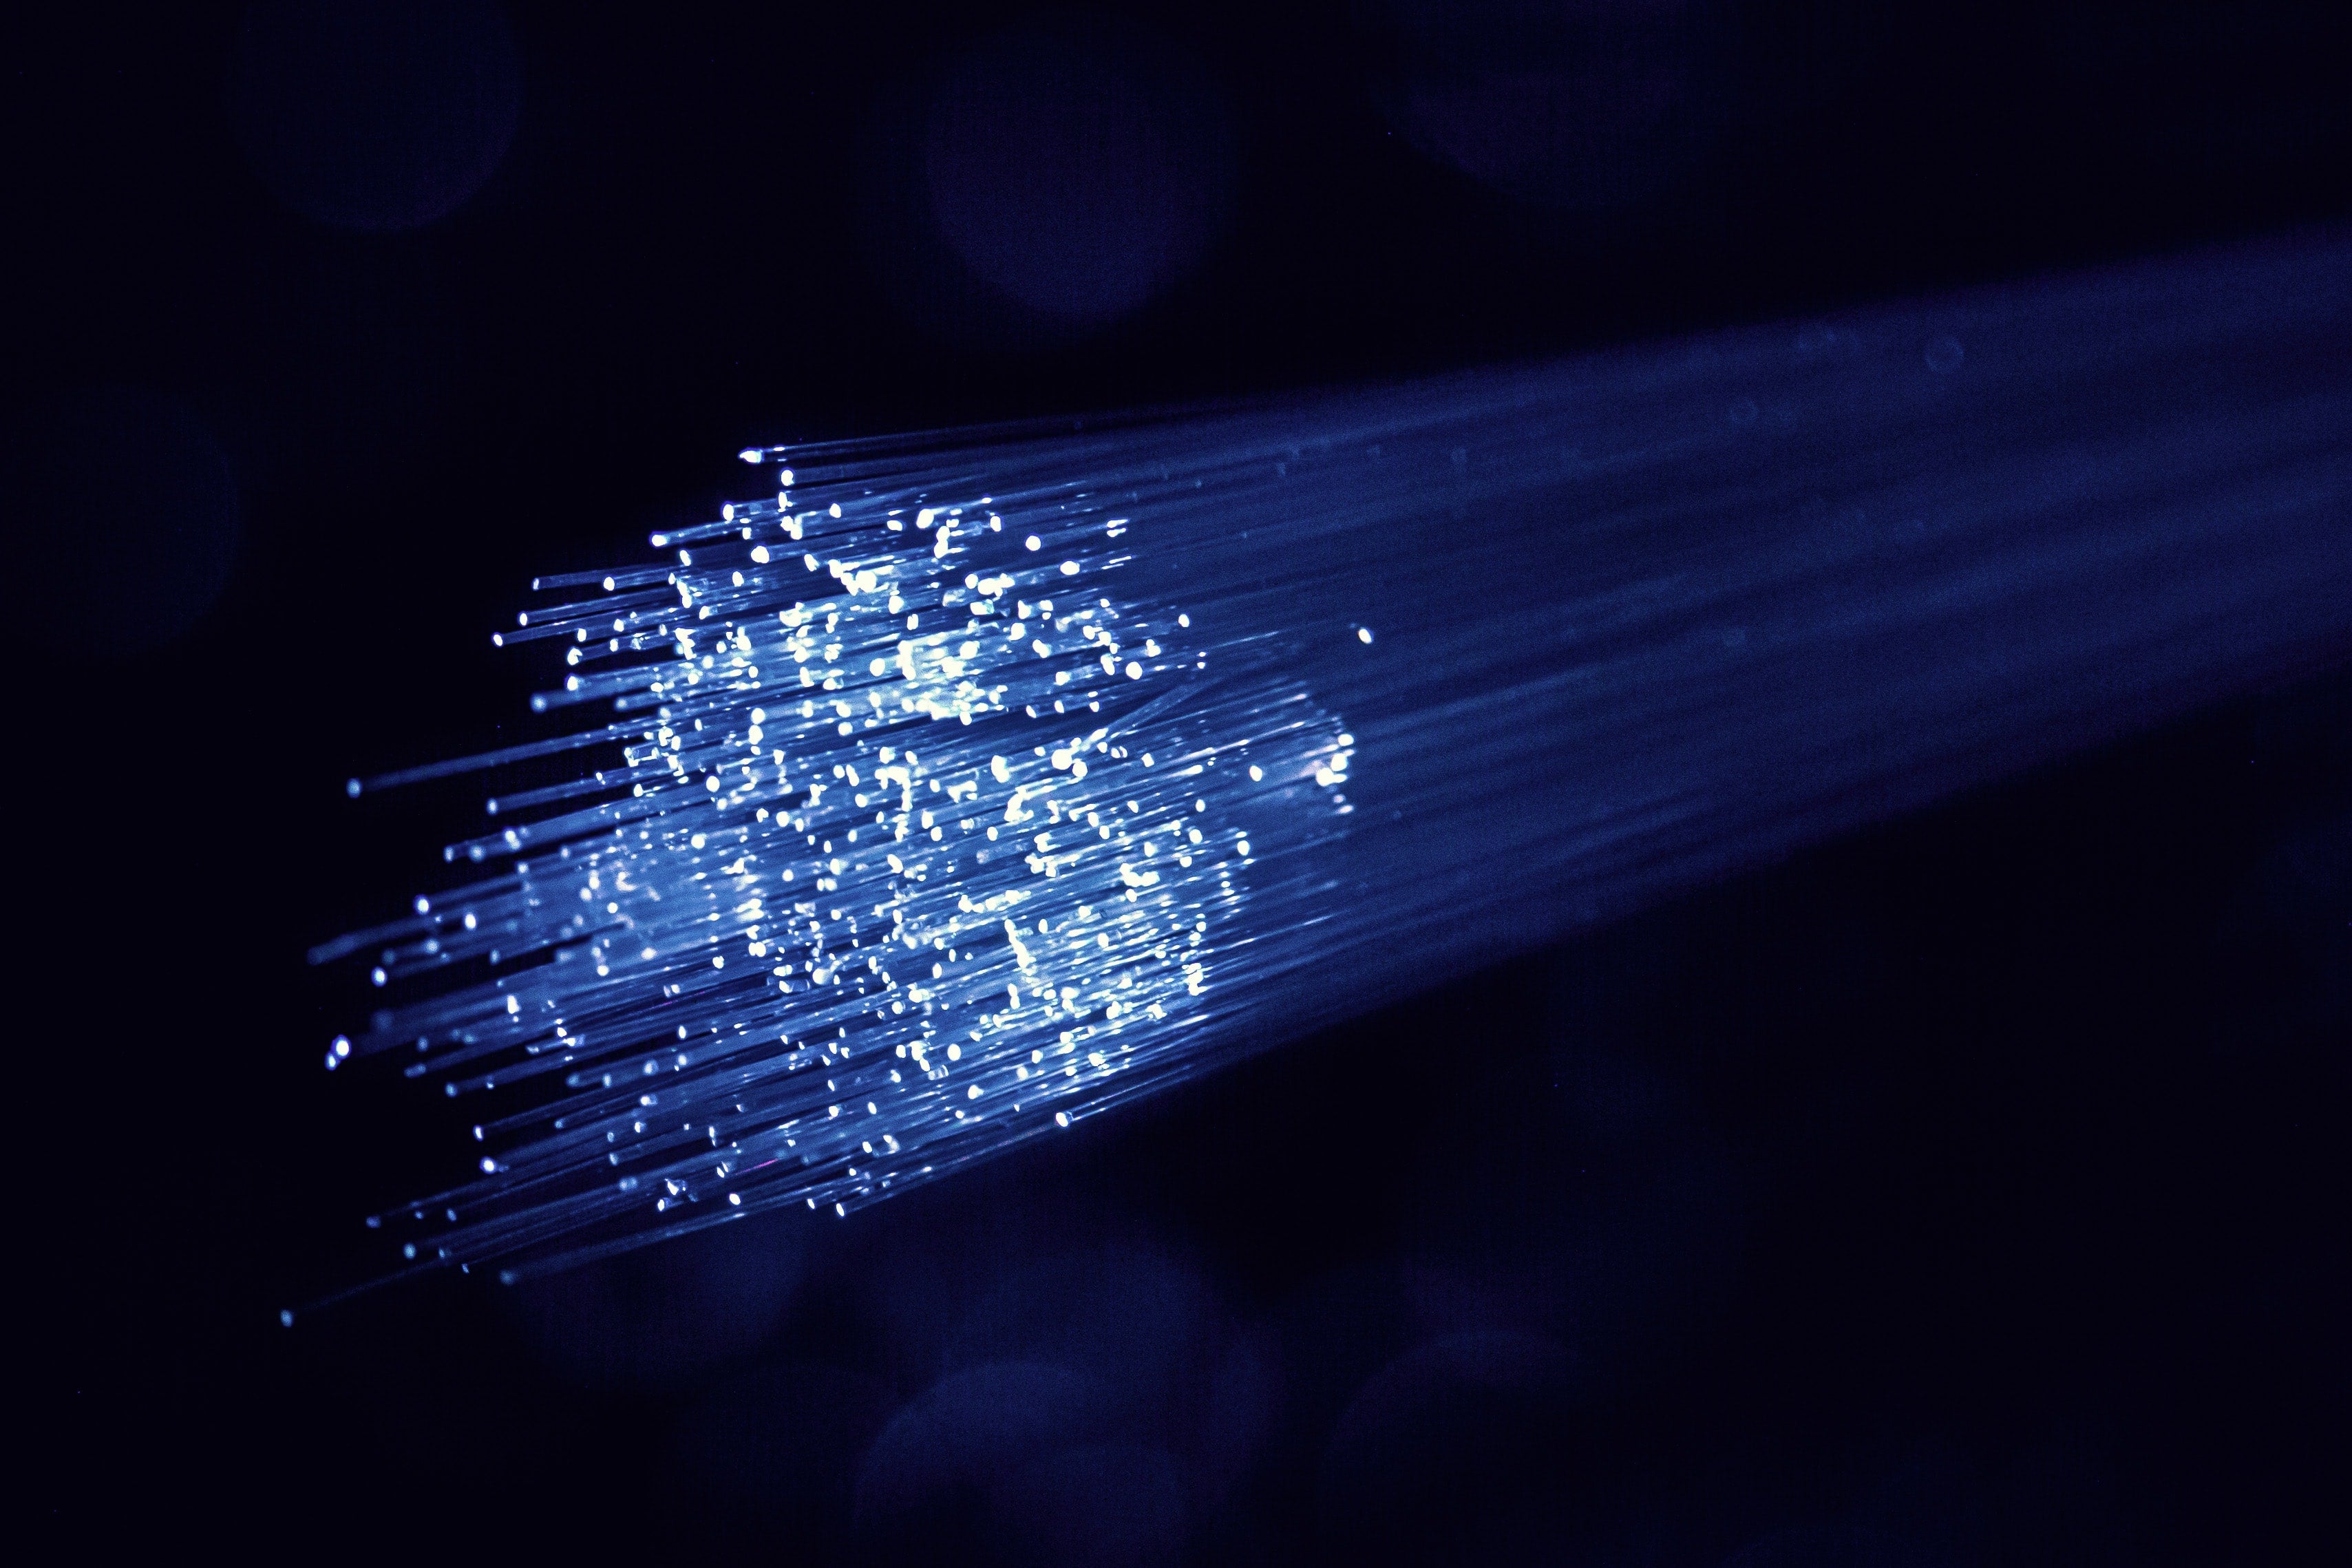 White and blue light emits from fiber optic cables.